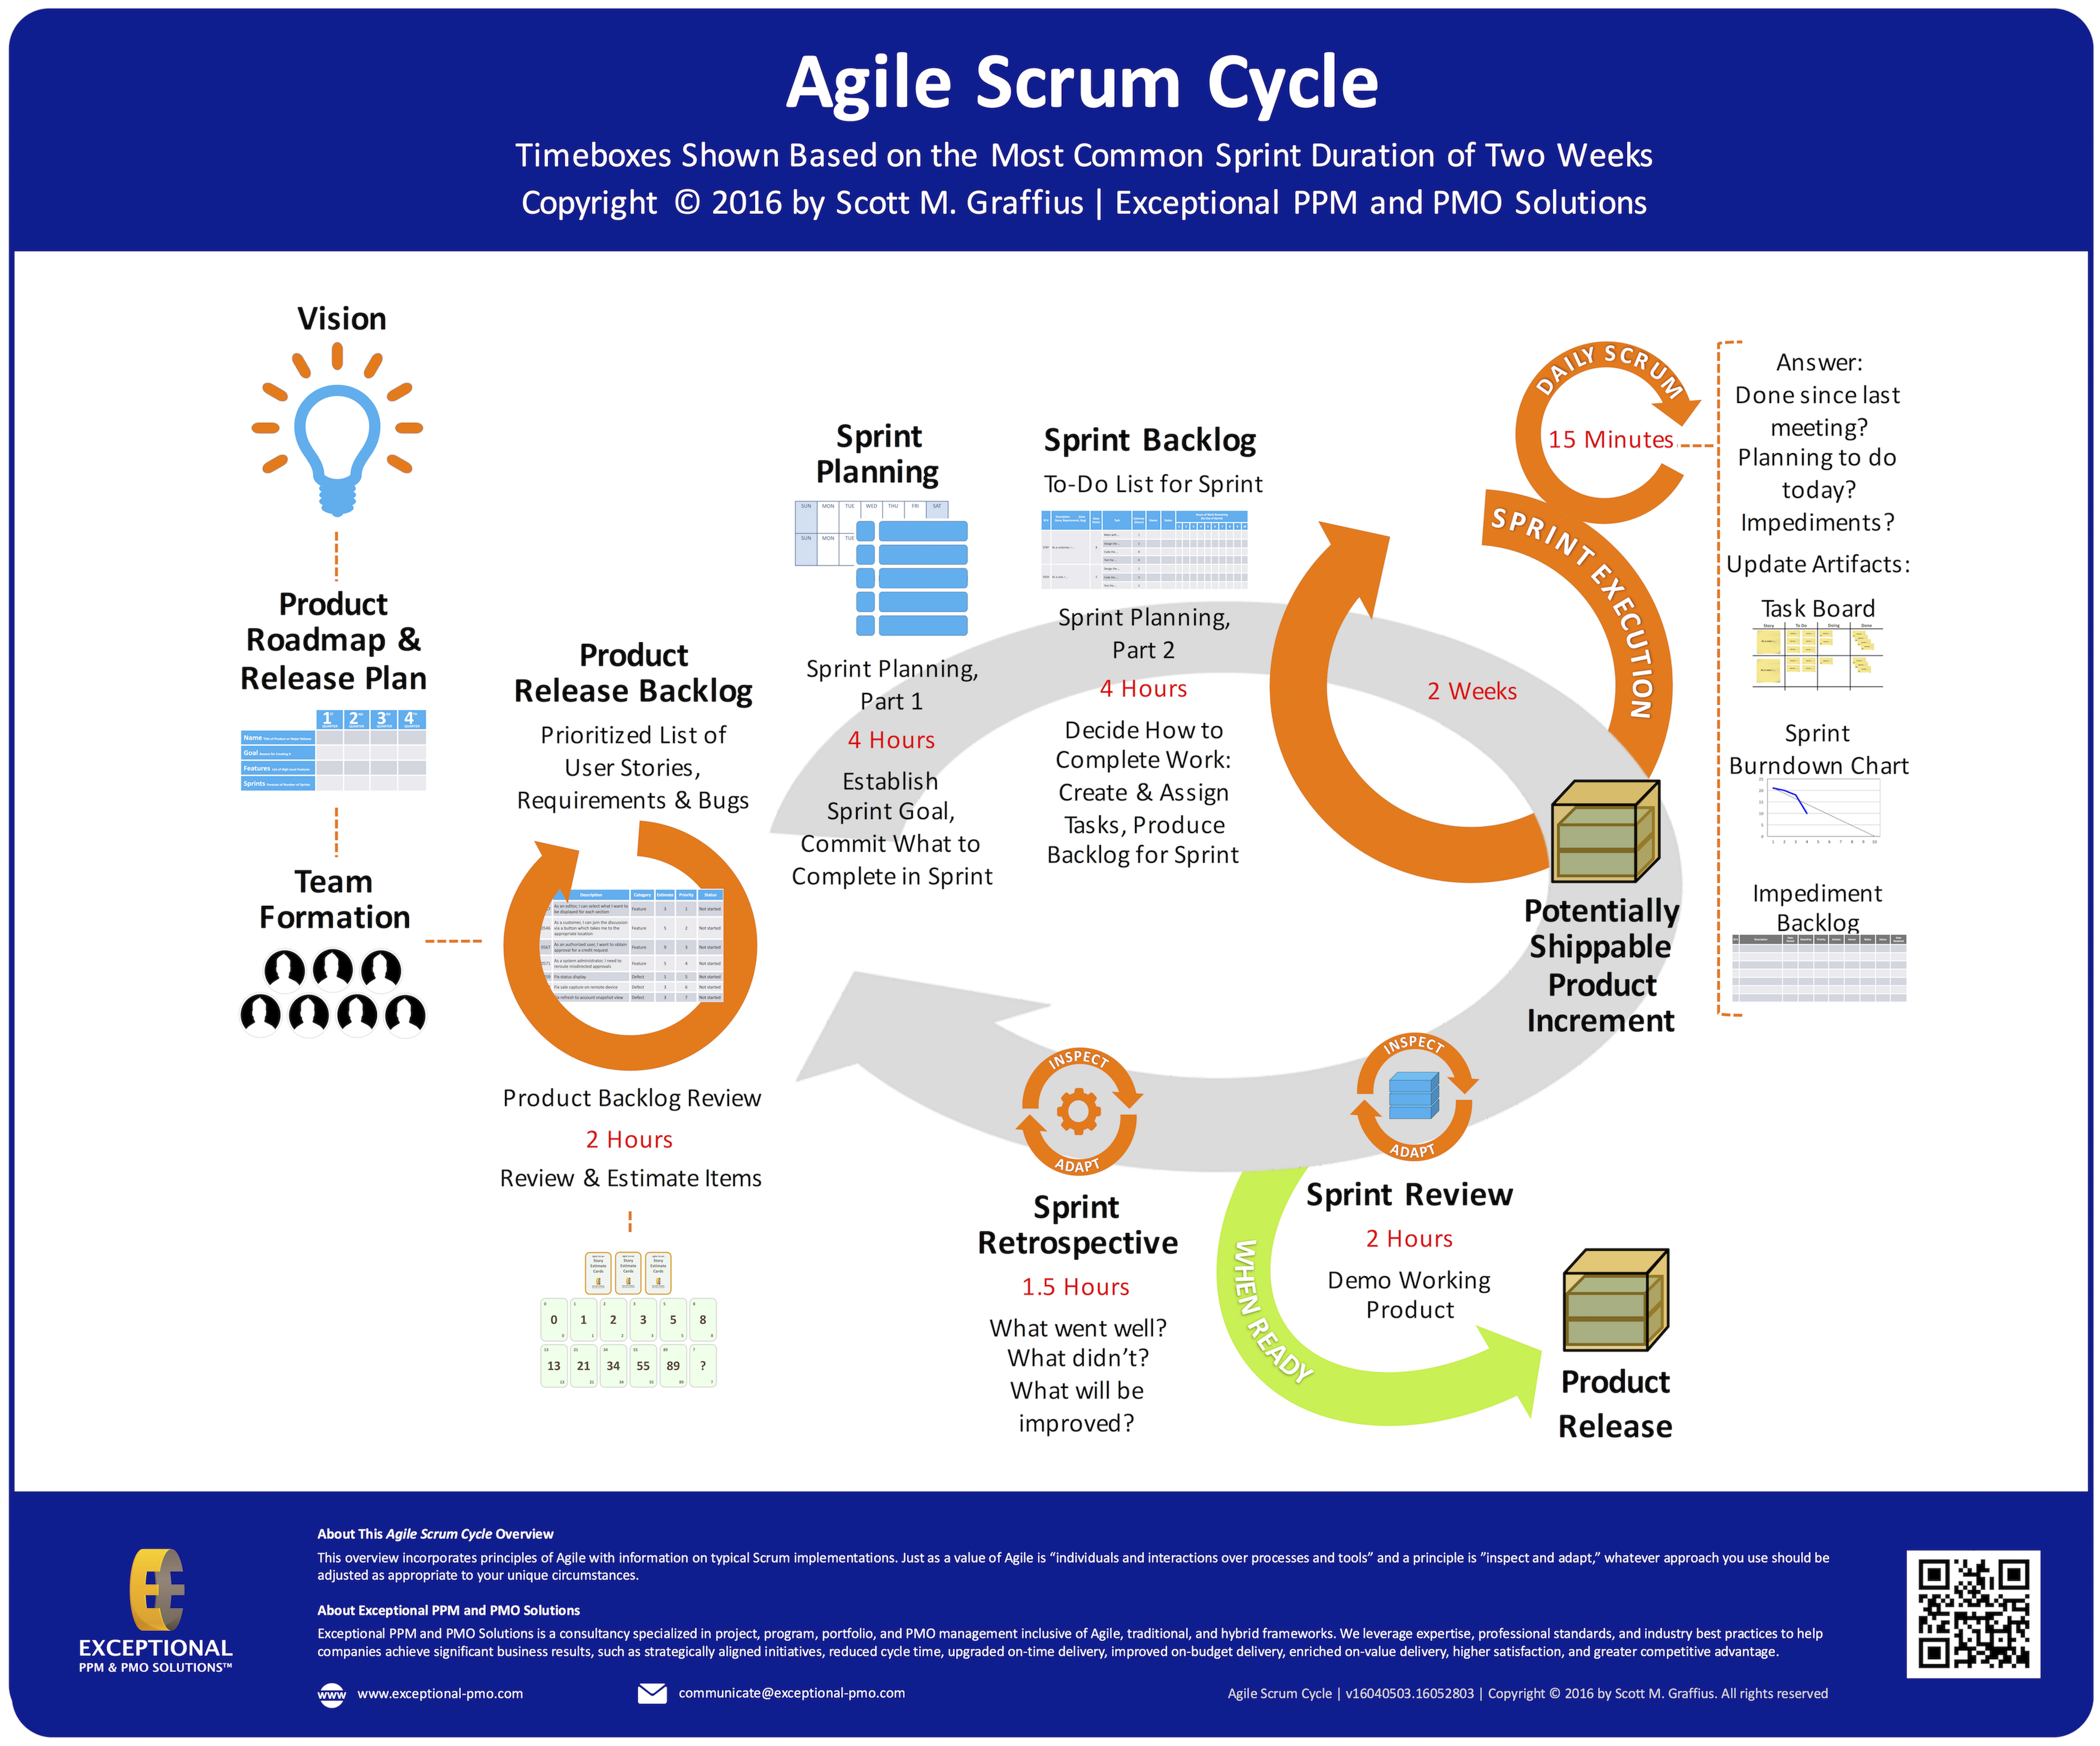  Agile Scrum Cycle Overview 